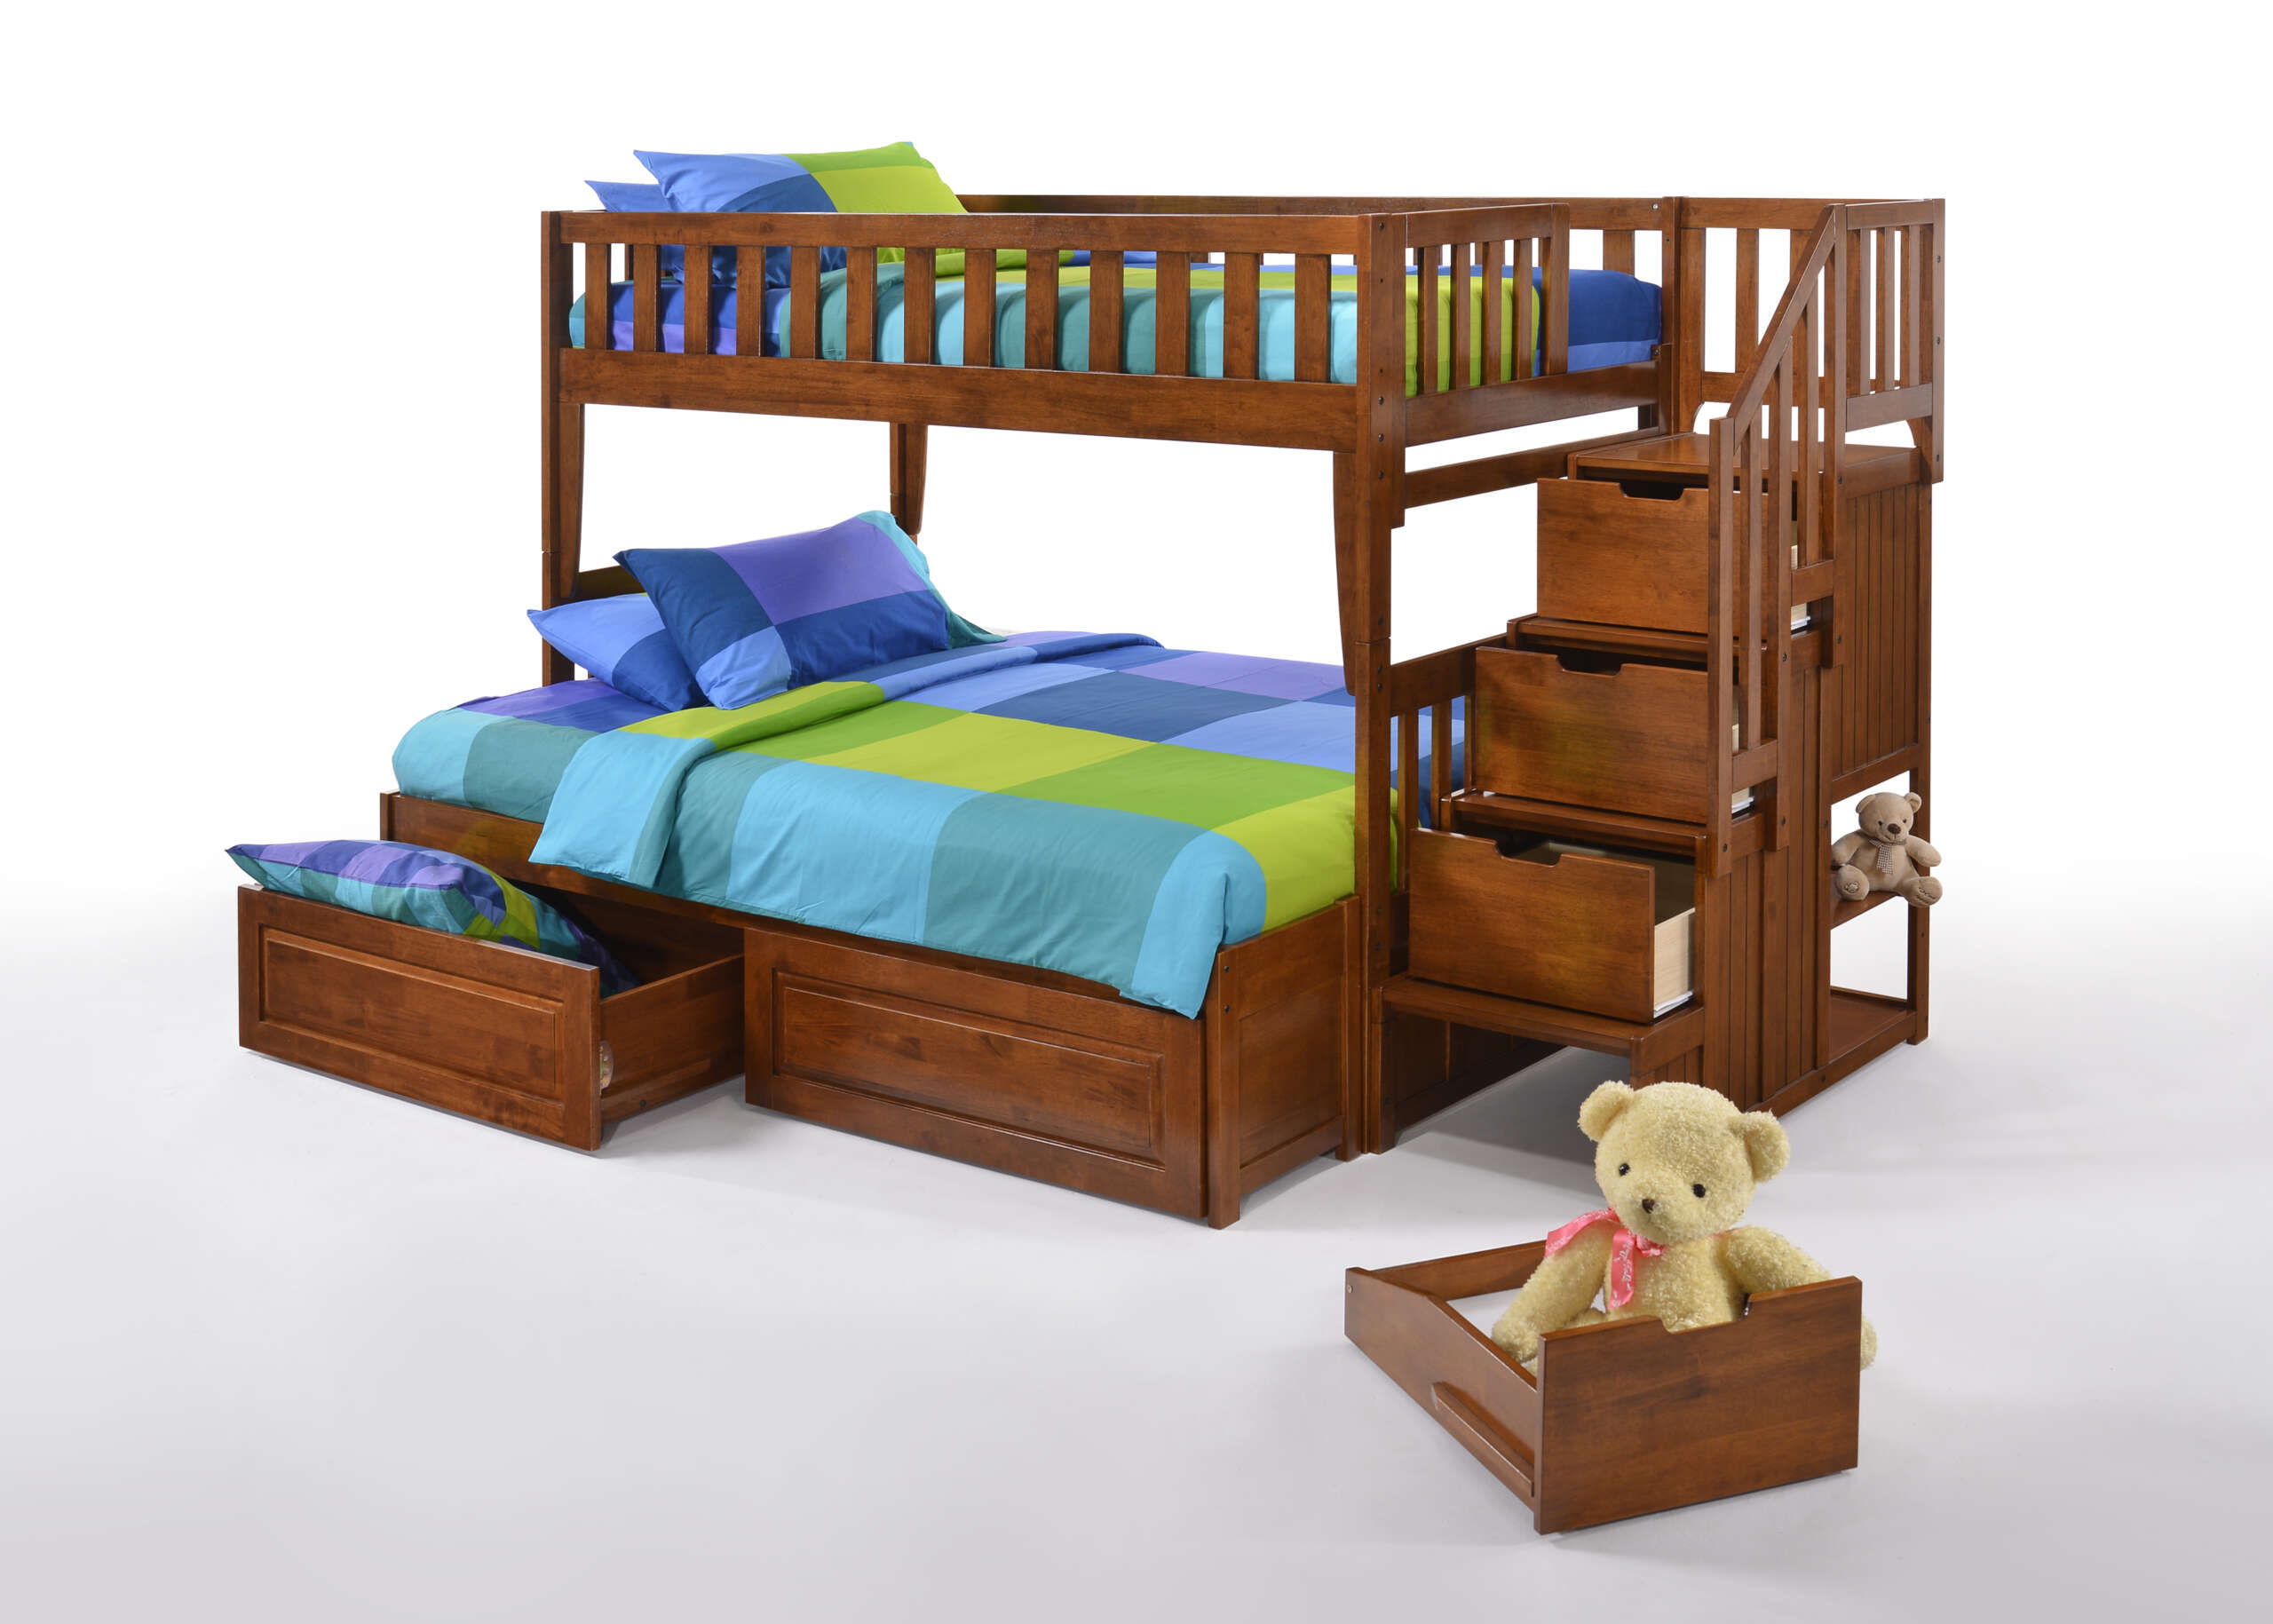 TWIN FULL STAIRCASE BUNK BED